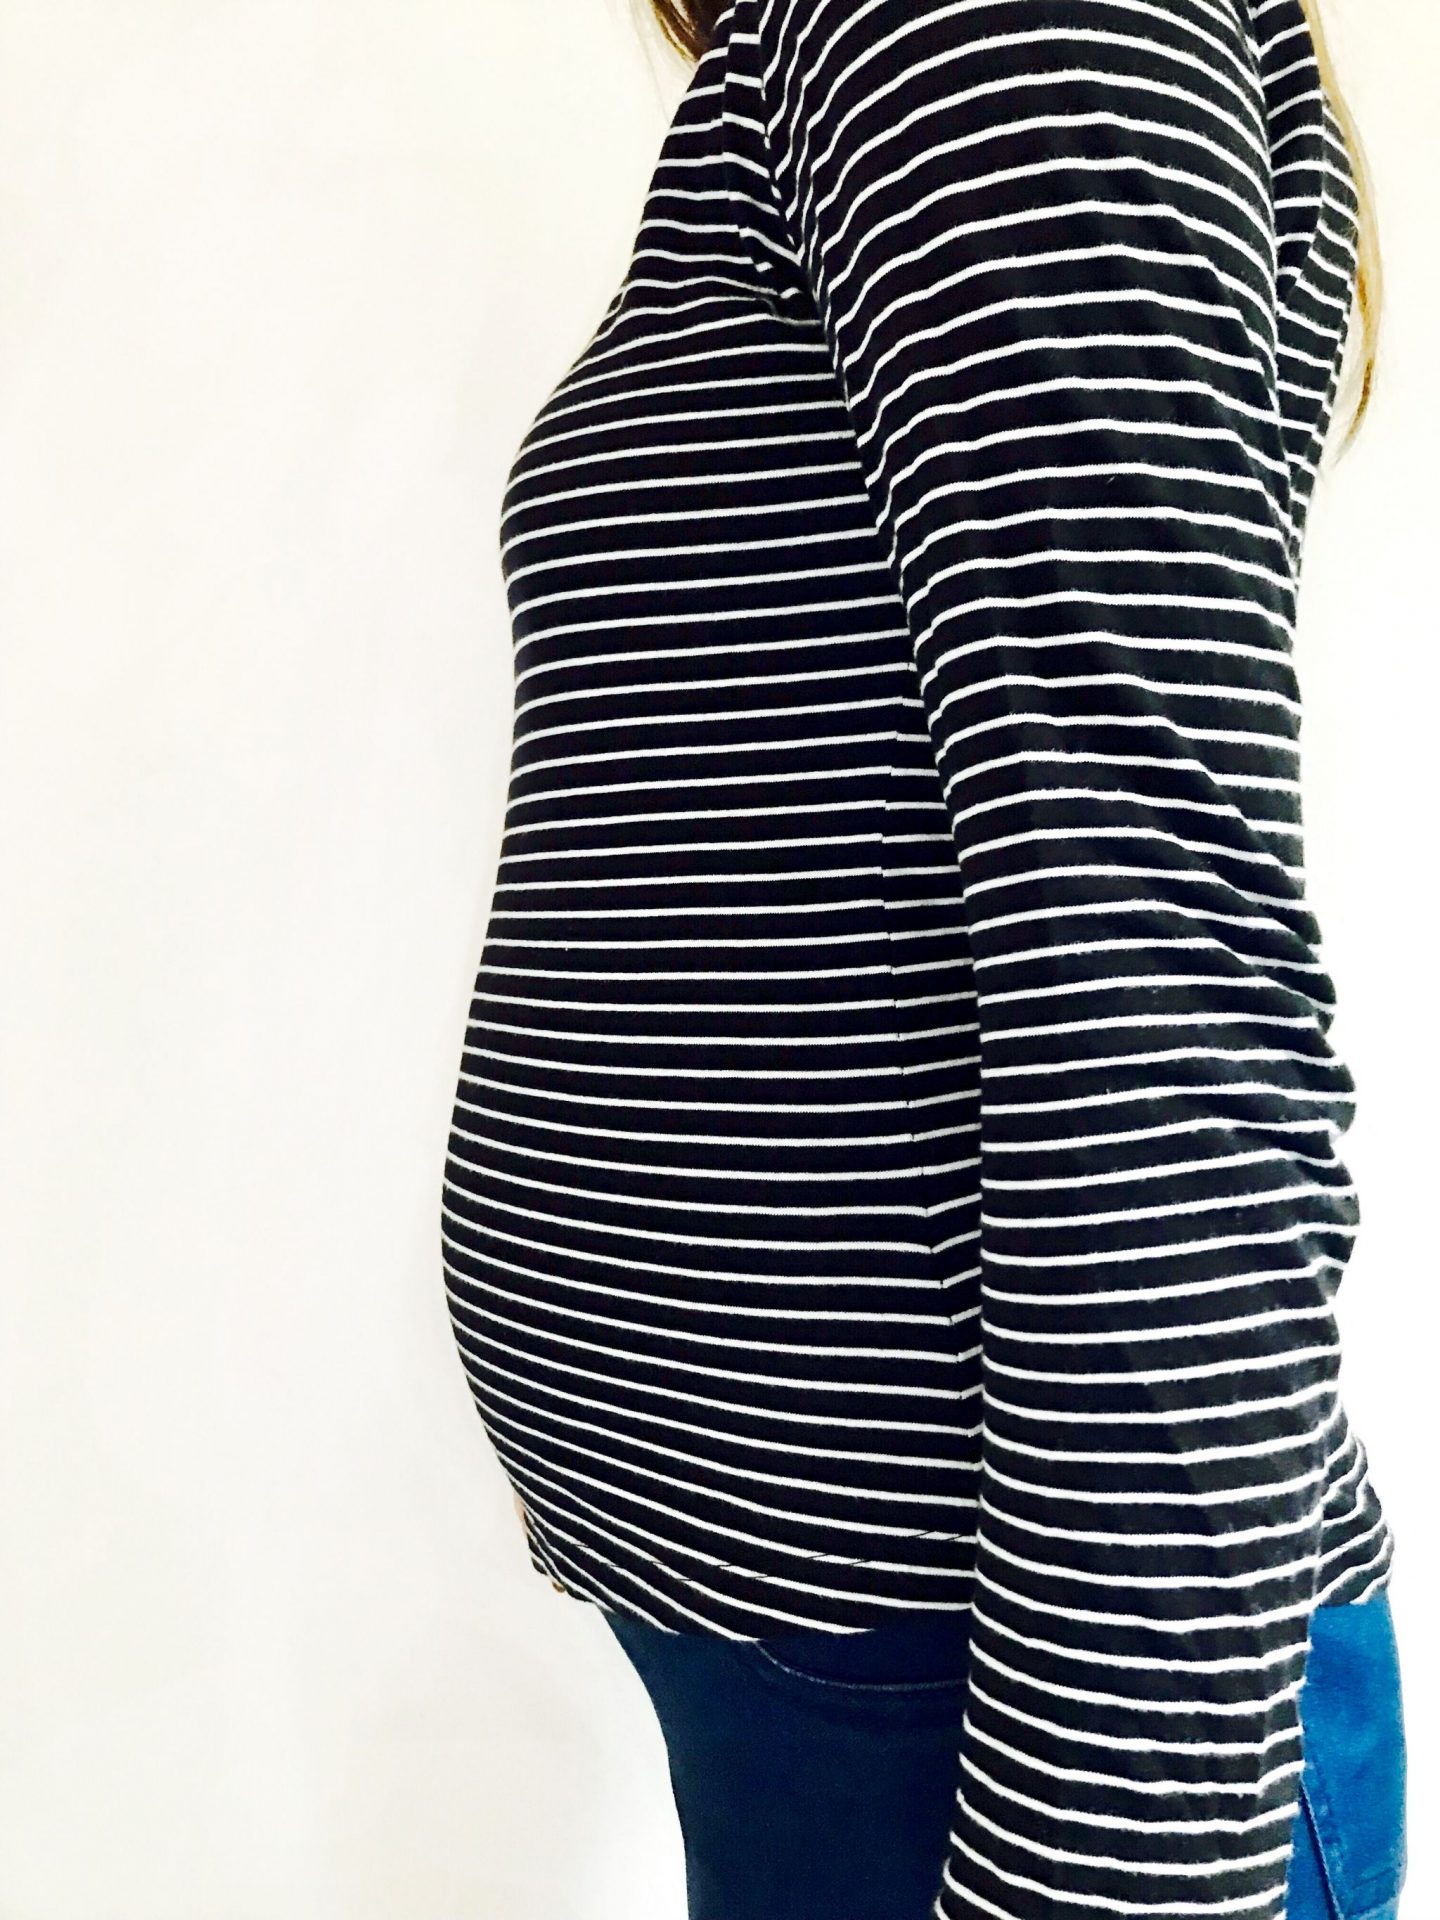 16 Week and 17 pregnancy update and bumpie baby bump